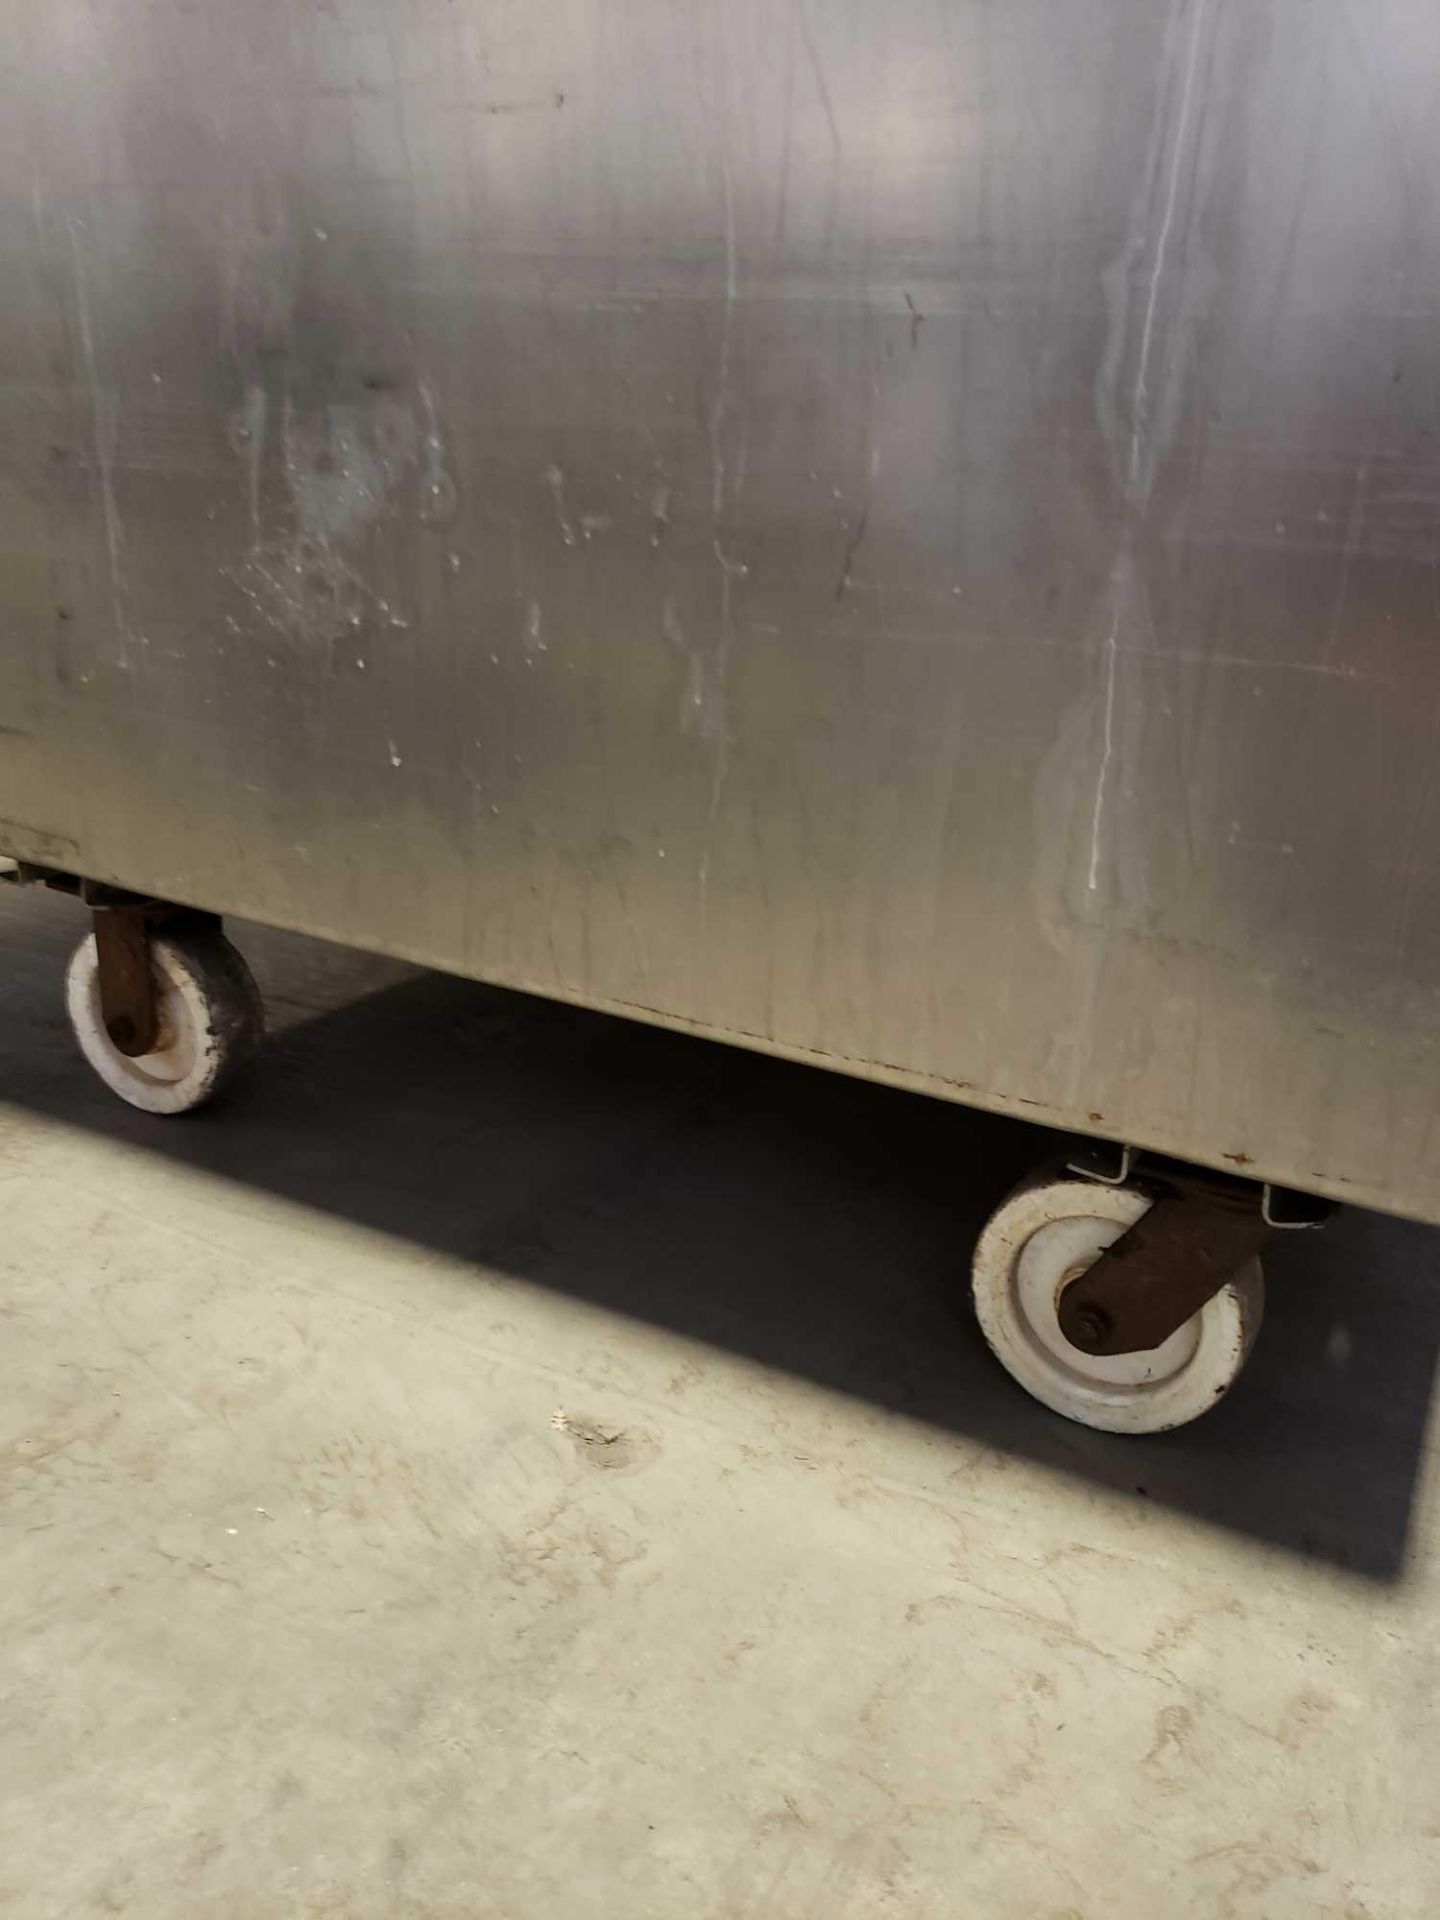 Stainless steel tank on casters with drain. Approx 49" wide by 38" deep by 30" tall. - Image 4 of 5